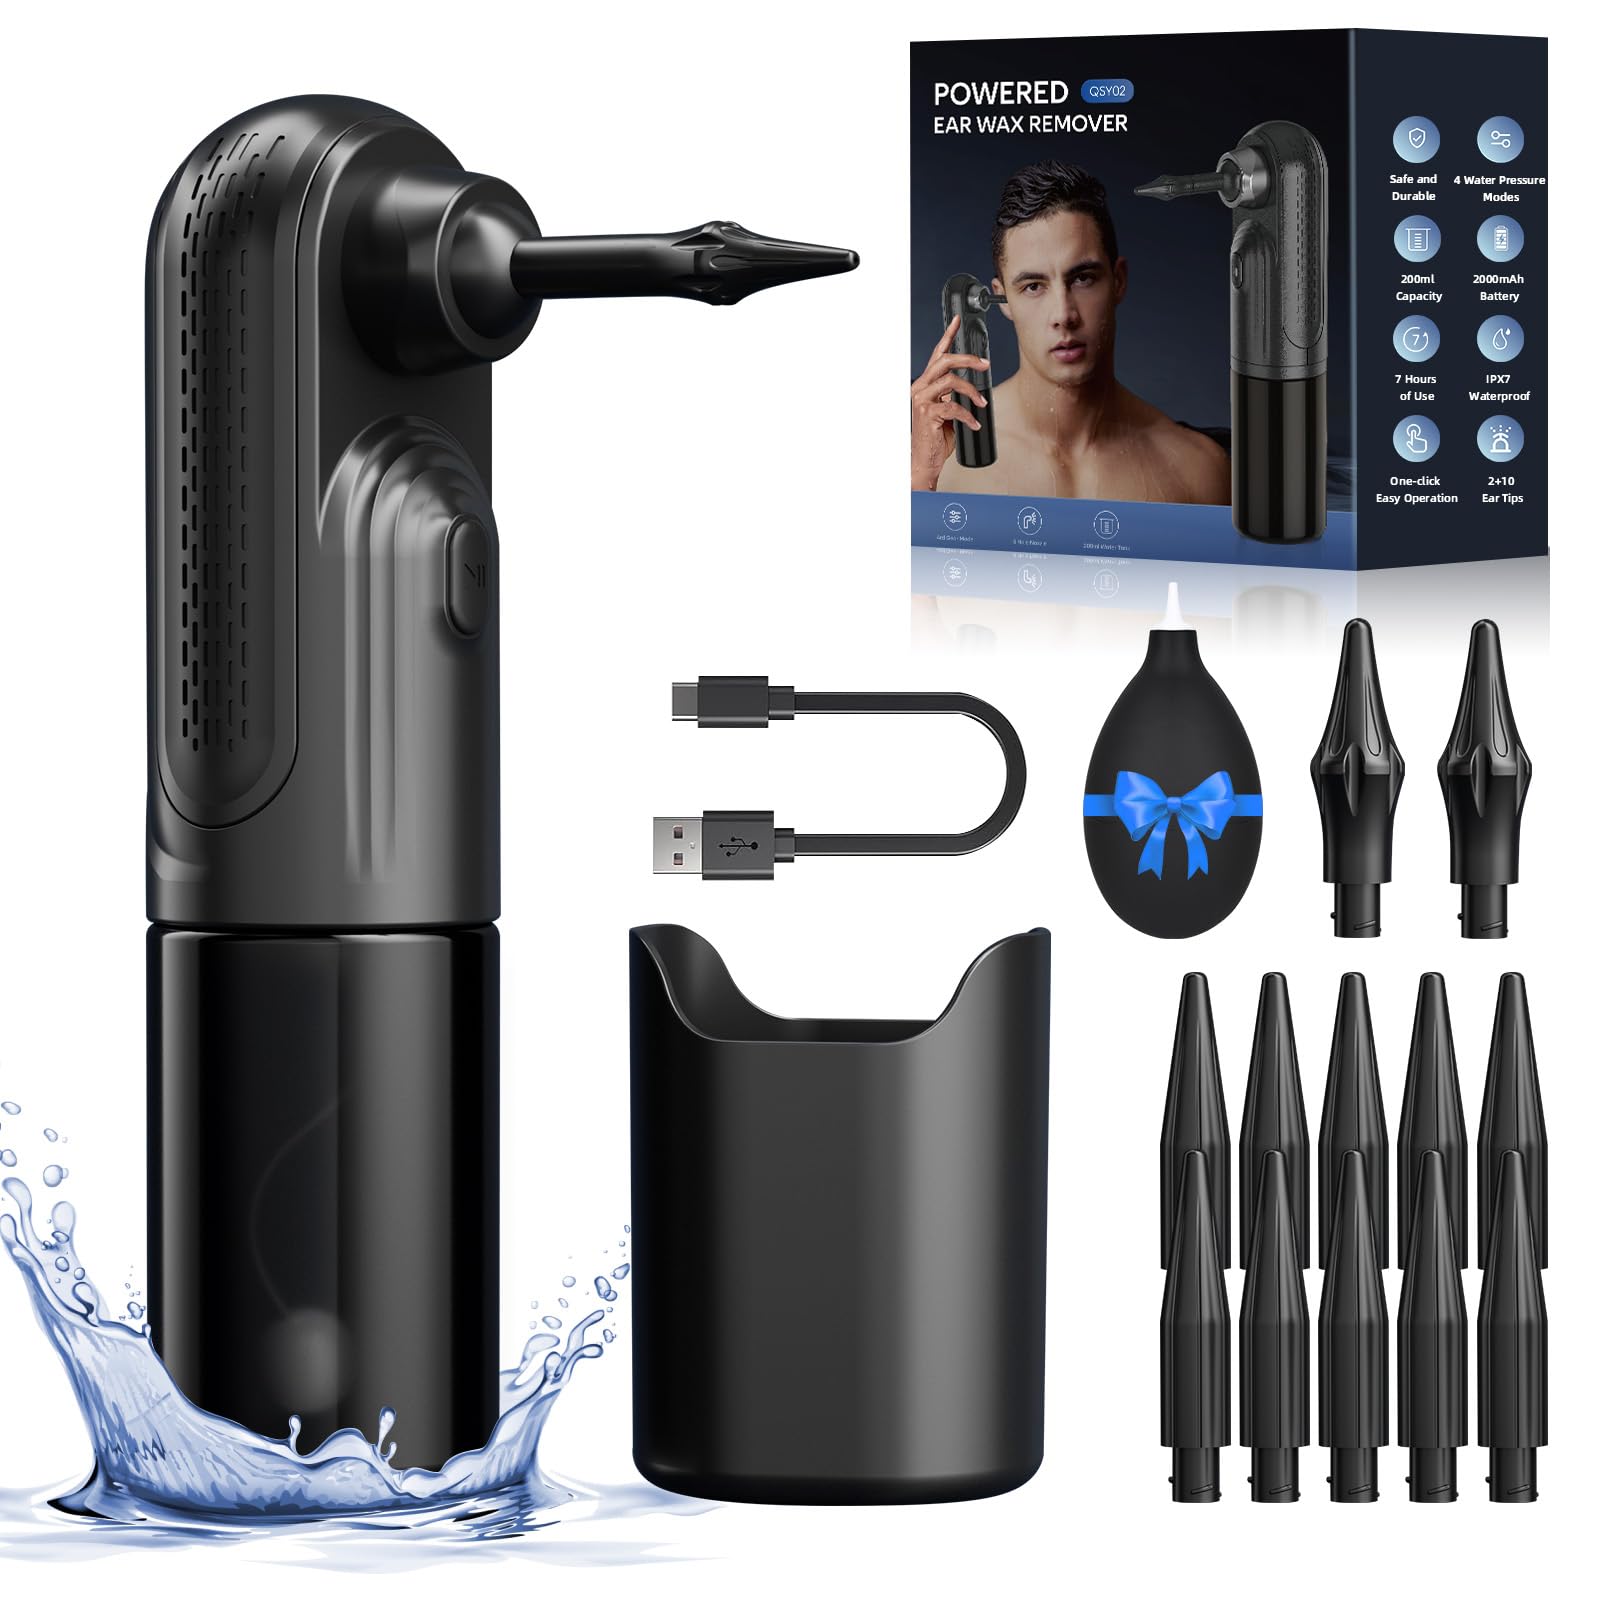 Ear Wax Removal Cleaning Kit - The Water Powered Ear Cleaner with 12 Reusable Replacement Tips - 4 Modes - Safe & Effective for Ear Wax Buildup - Electric Ear Wax Removal Kit